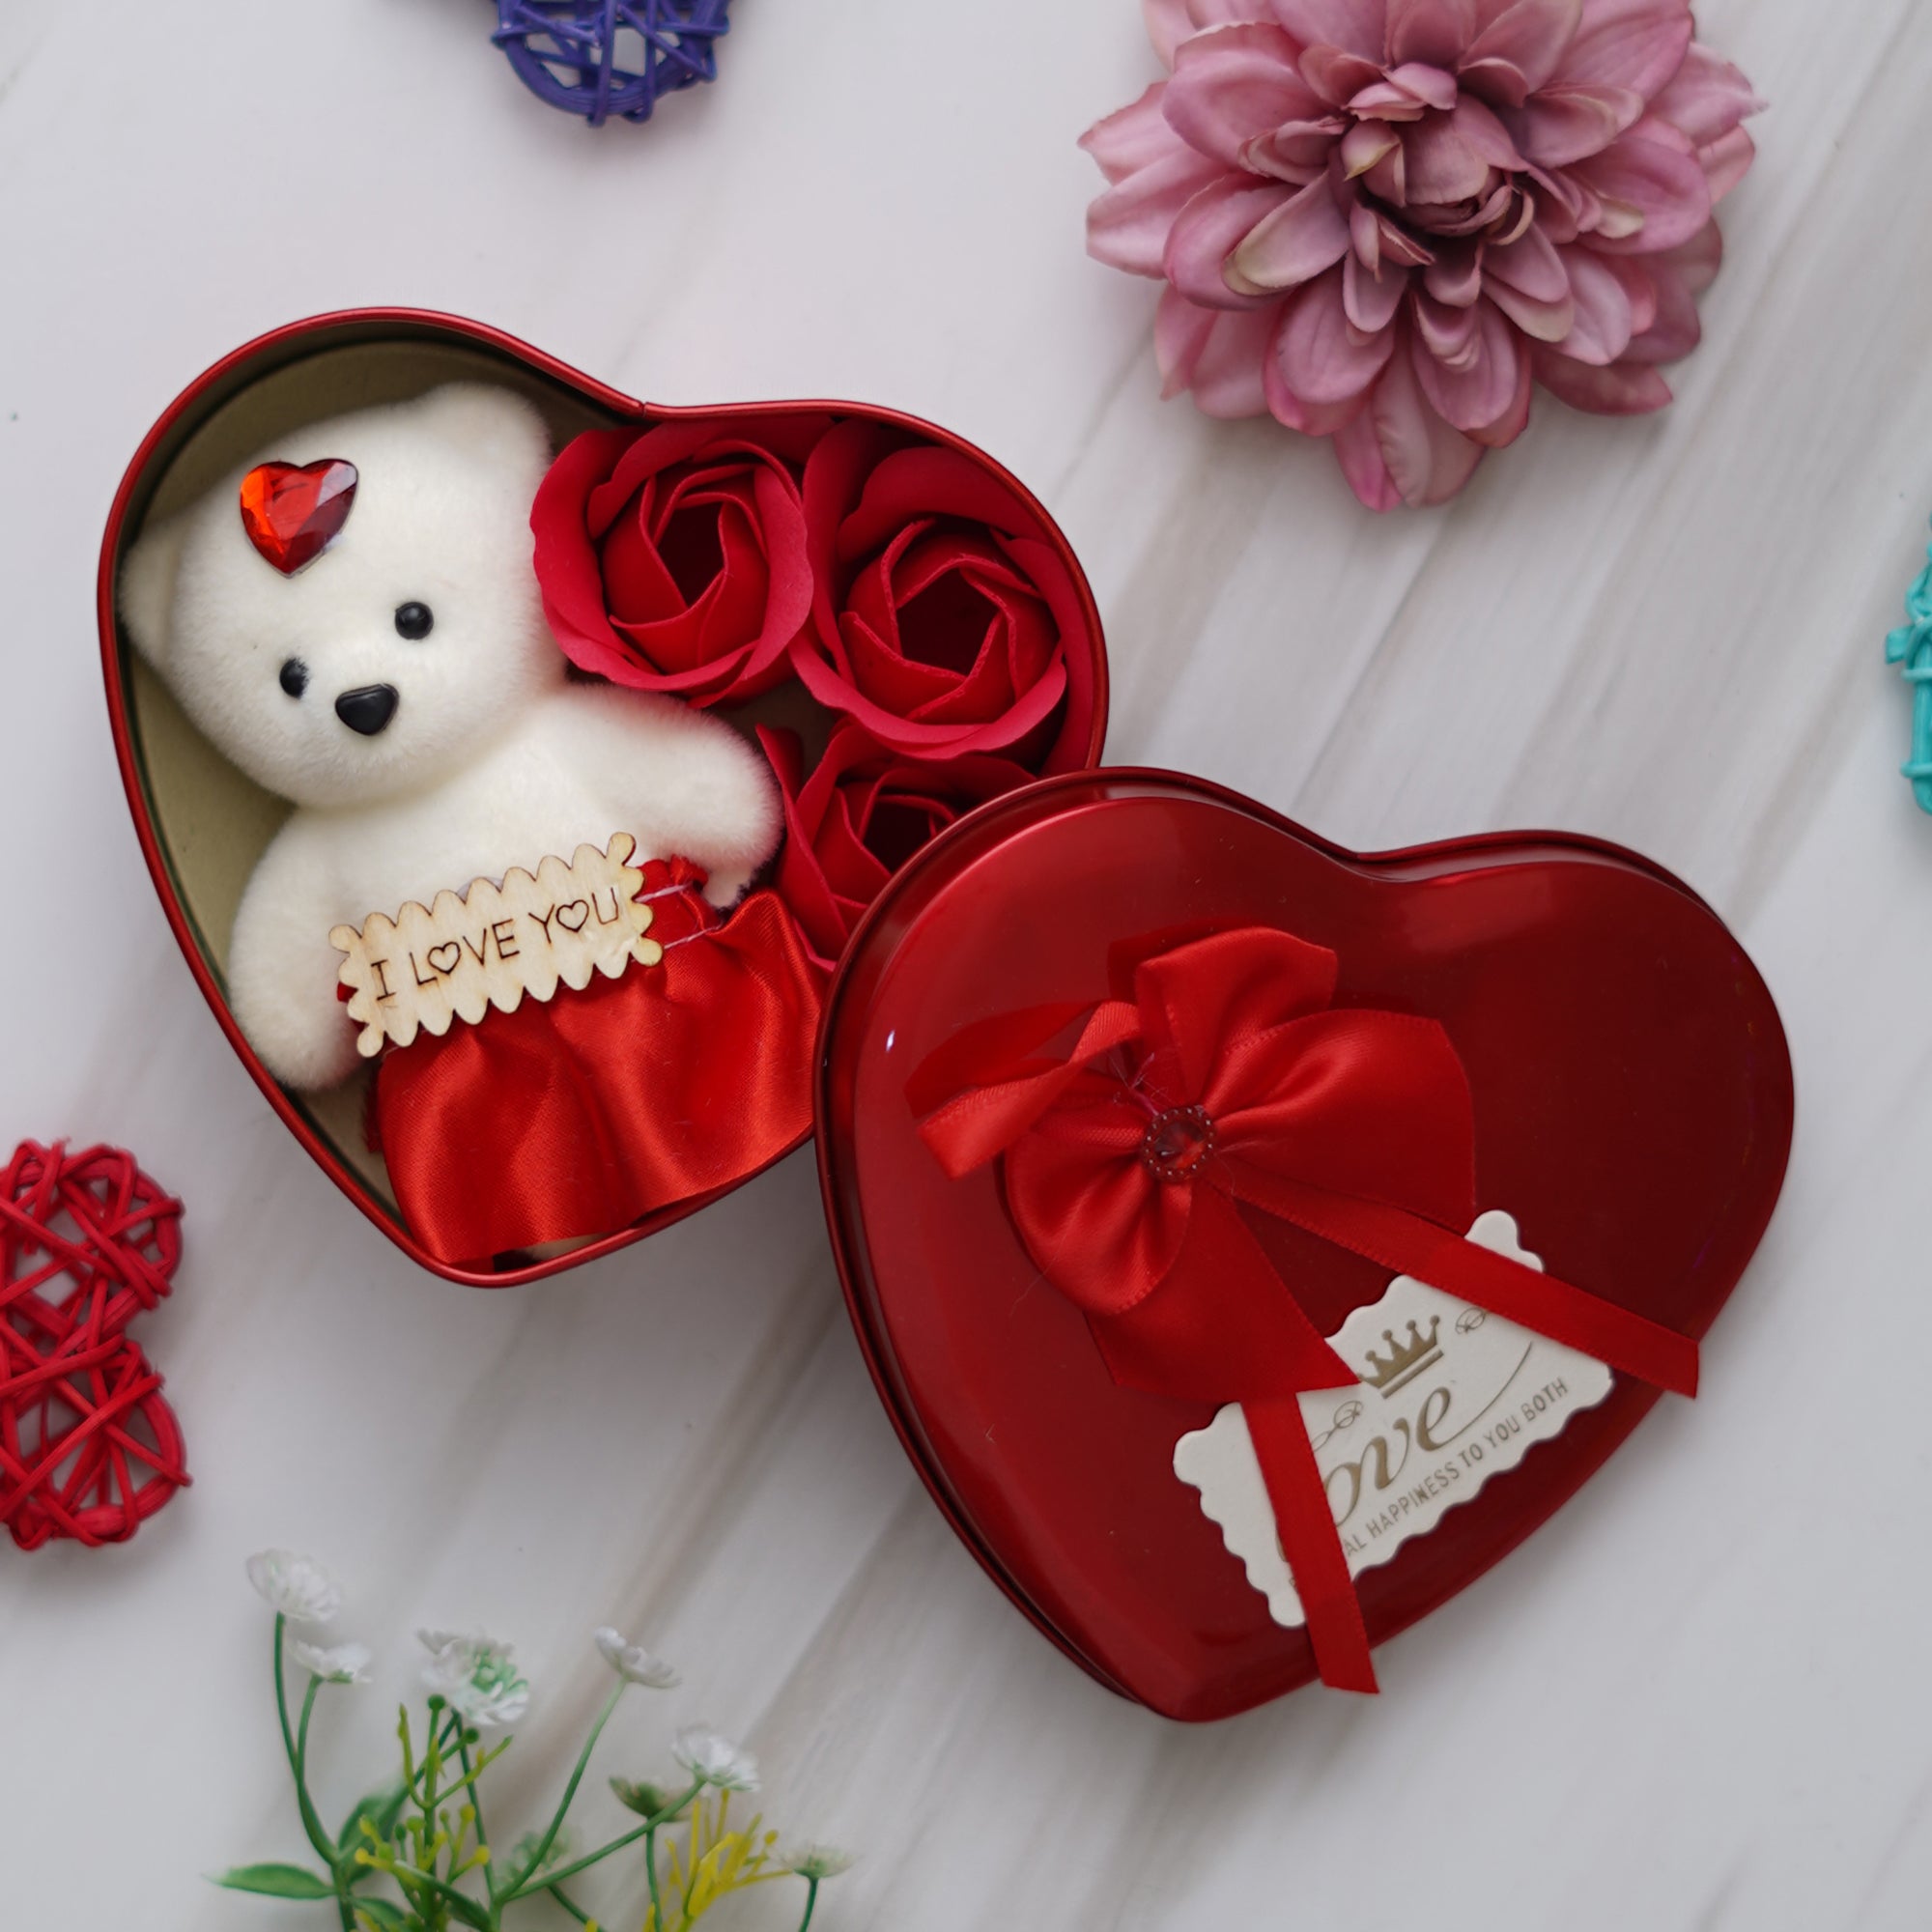 Valentine Combo of Pack of 8 Love Gift Cards, Golden Red Rose Gift Set, "My Heart Beats Only For You" Wooden Showpiece With Stand, Heart Shaped Gift Box Set with White Teddy and Red Roses 7